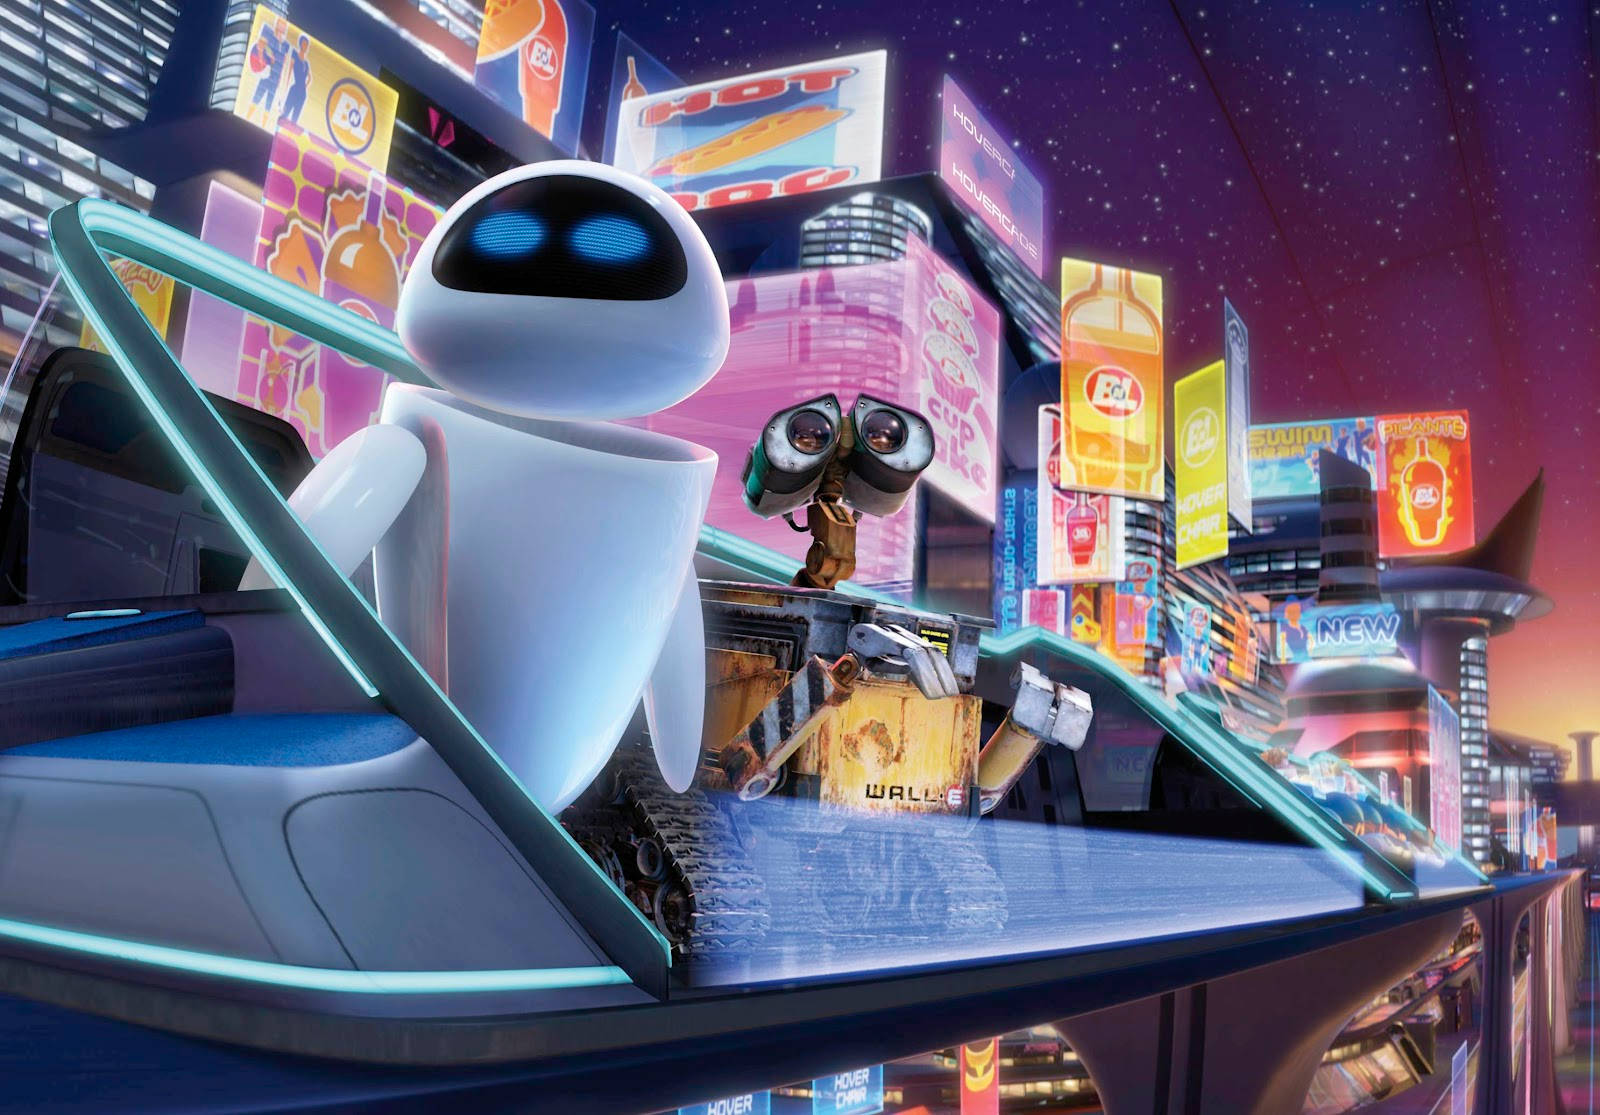 EVE And WALL E In The City Wallpaper